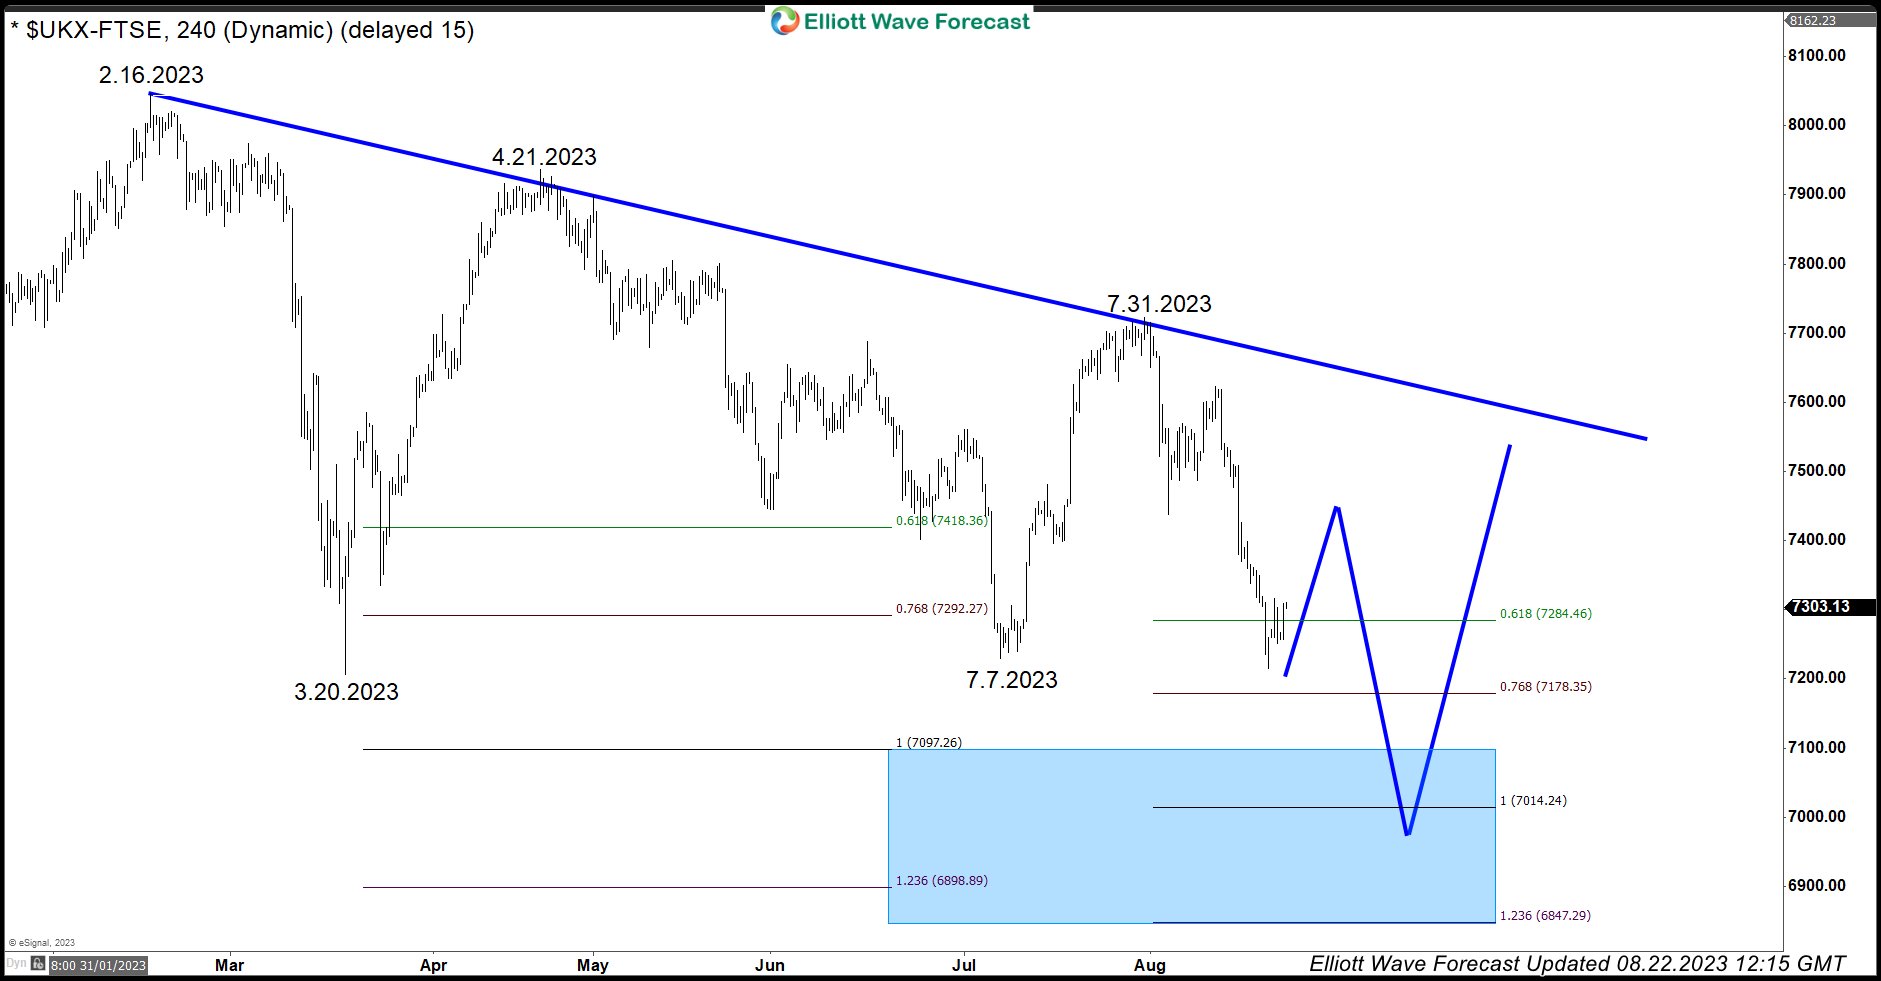 FTSE and Hangseng Should Act As a Floor for the Indices